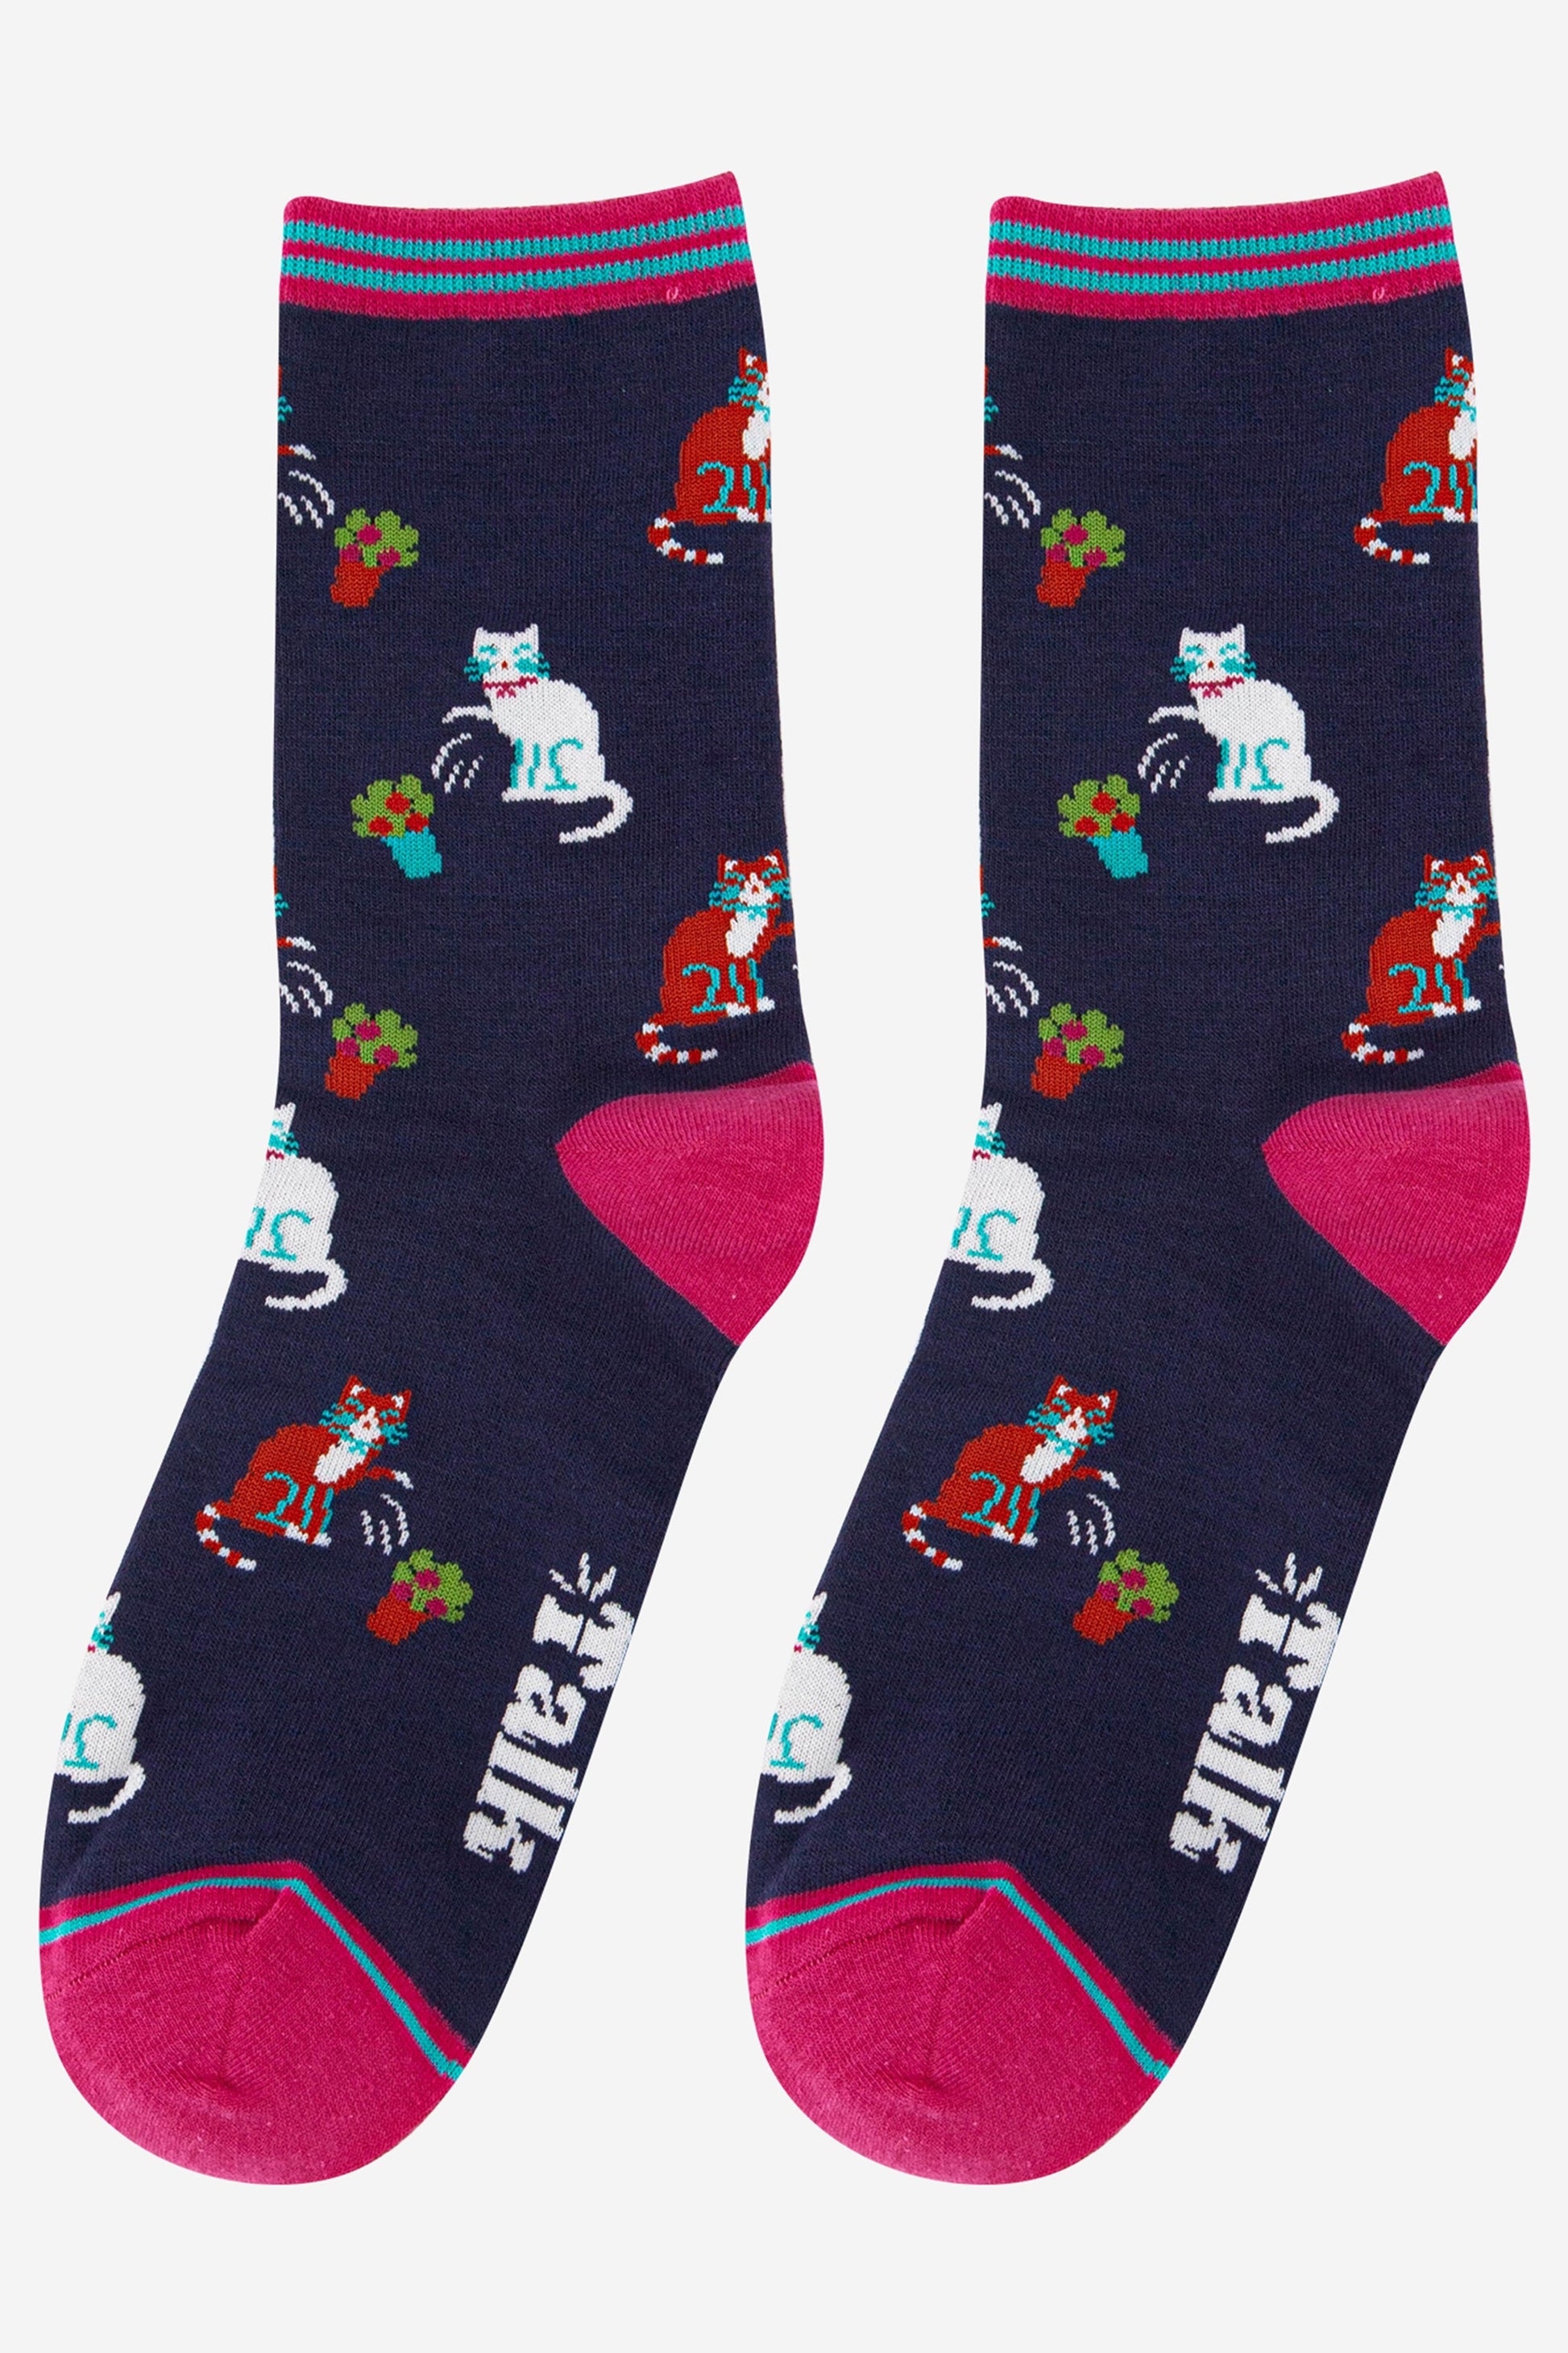 navy blue socks with pink heel, toe and trim featuring a funny cat print